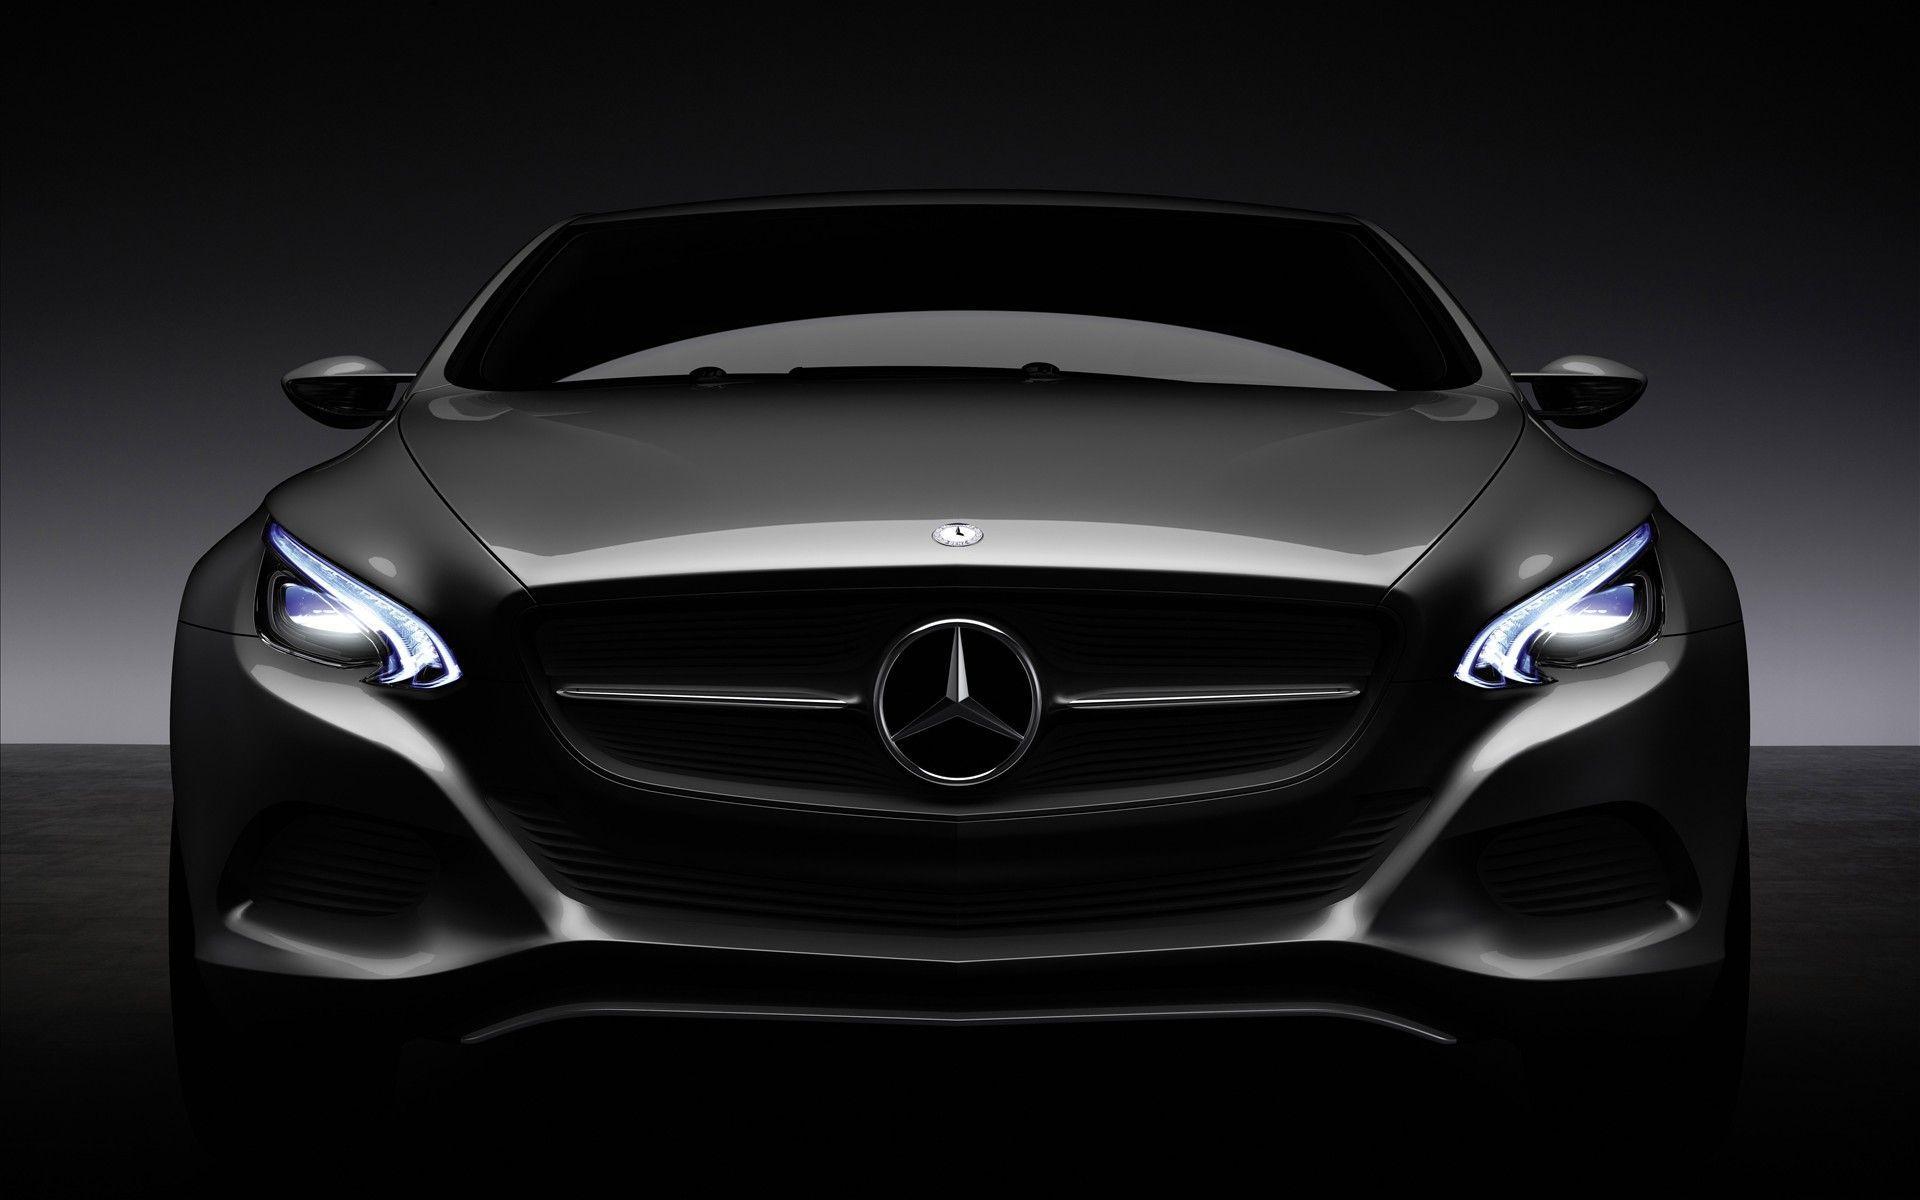 1,000 Mercedes benz logo Stock Pictures, Editorial Images and Stock Photos  | Shutterstock